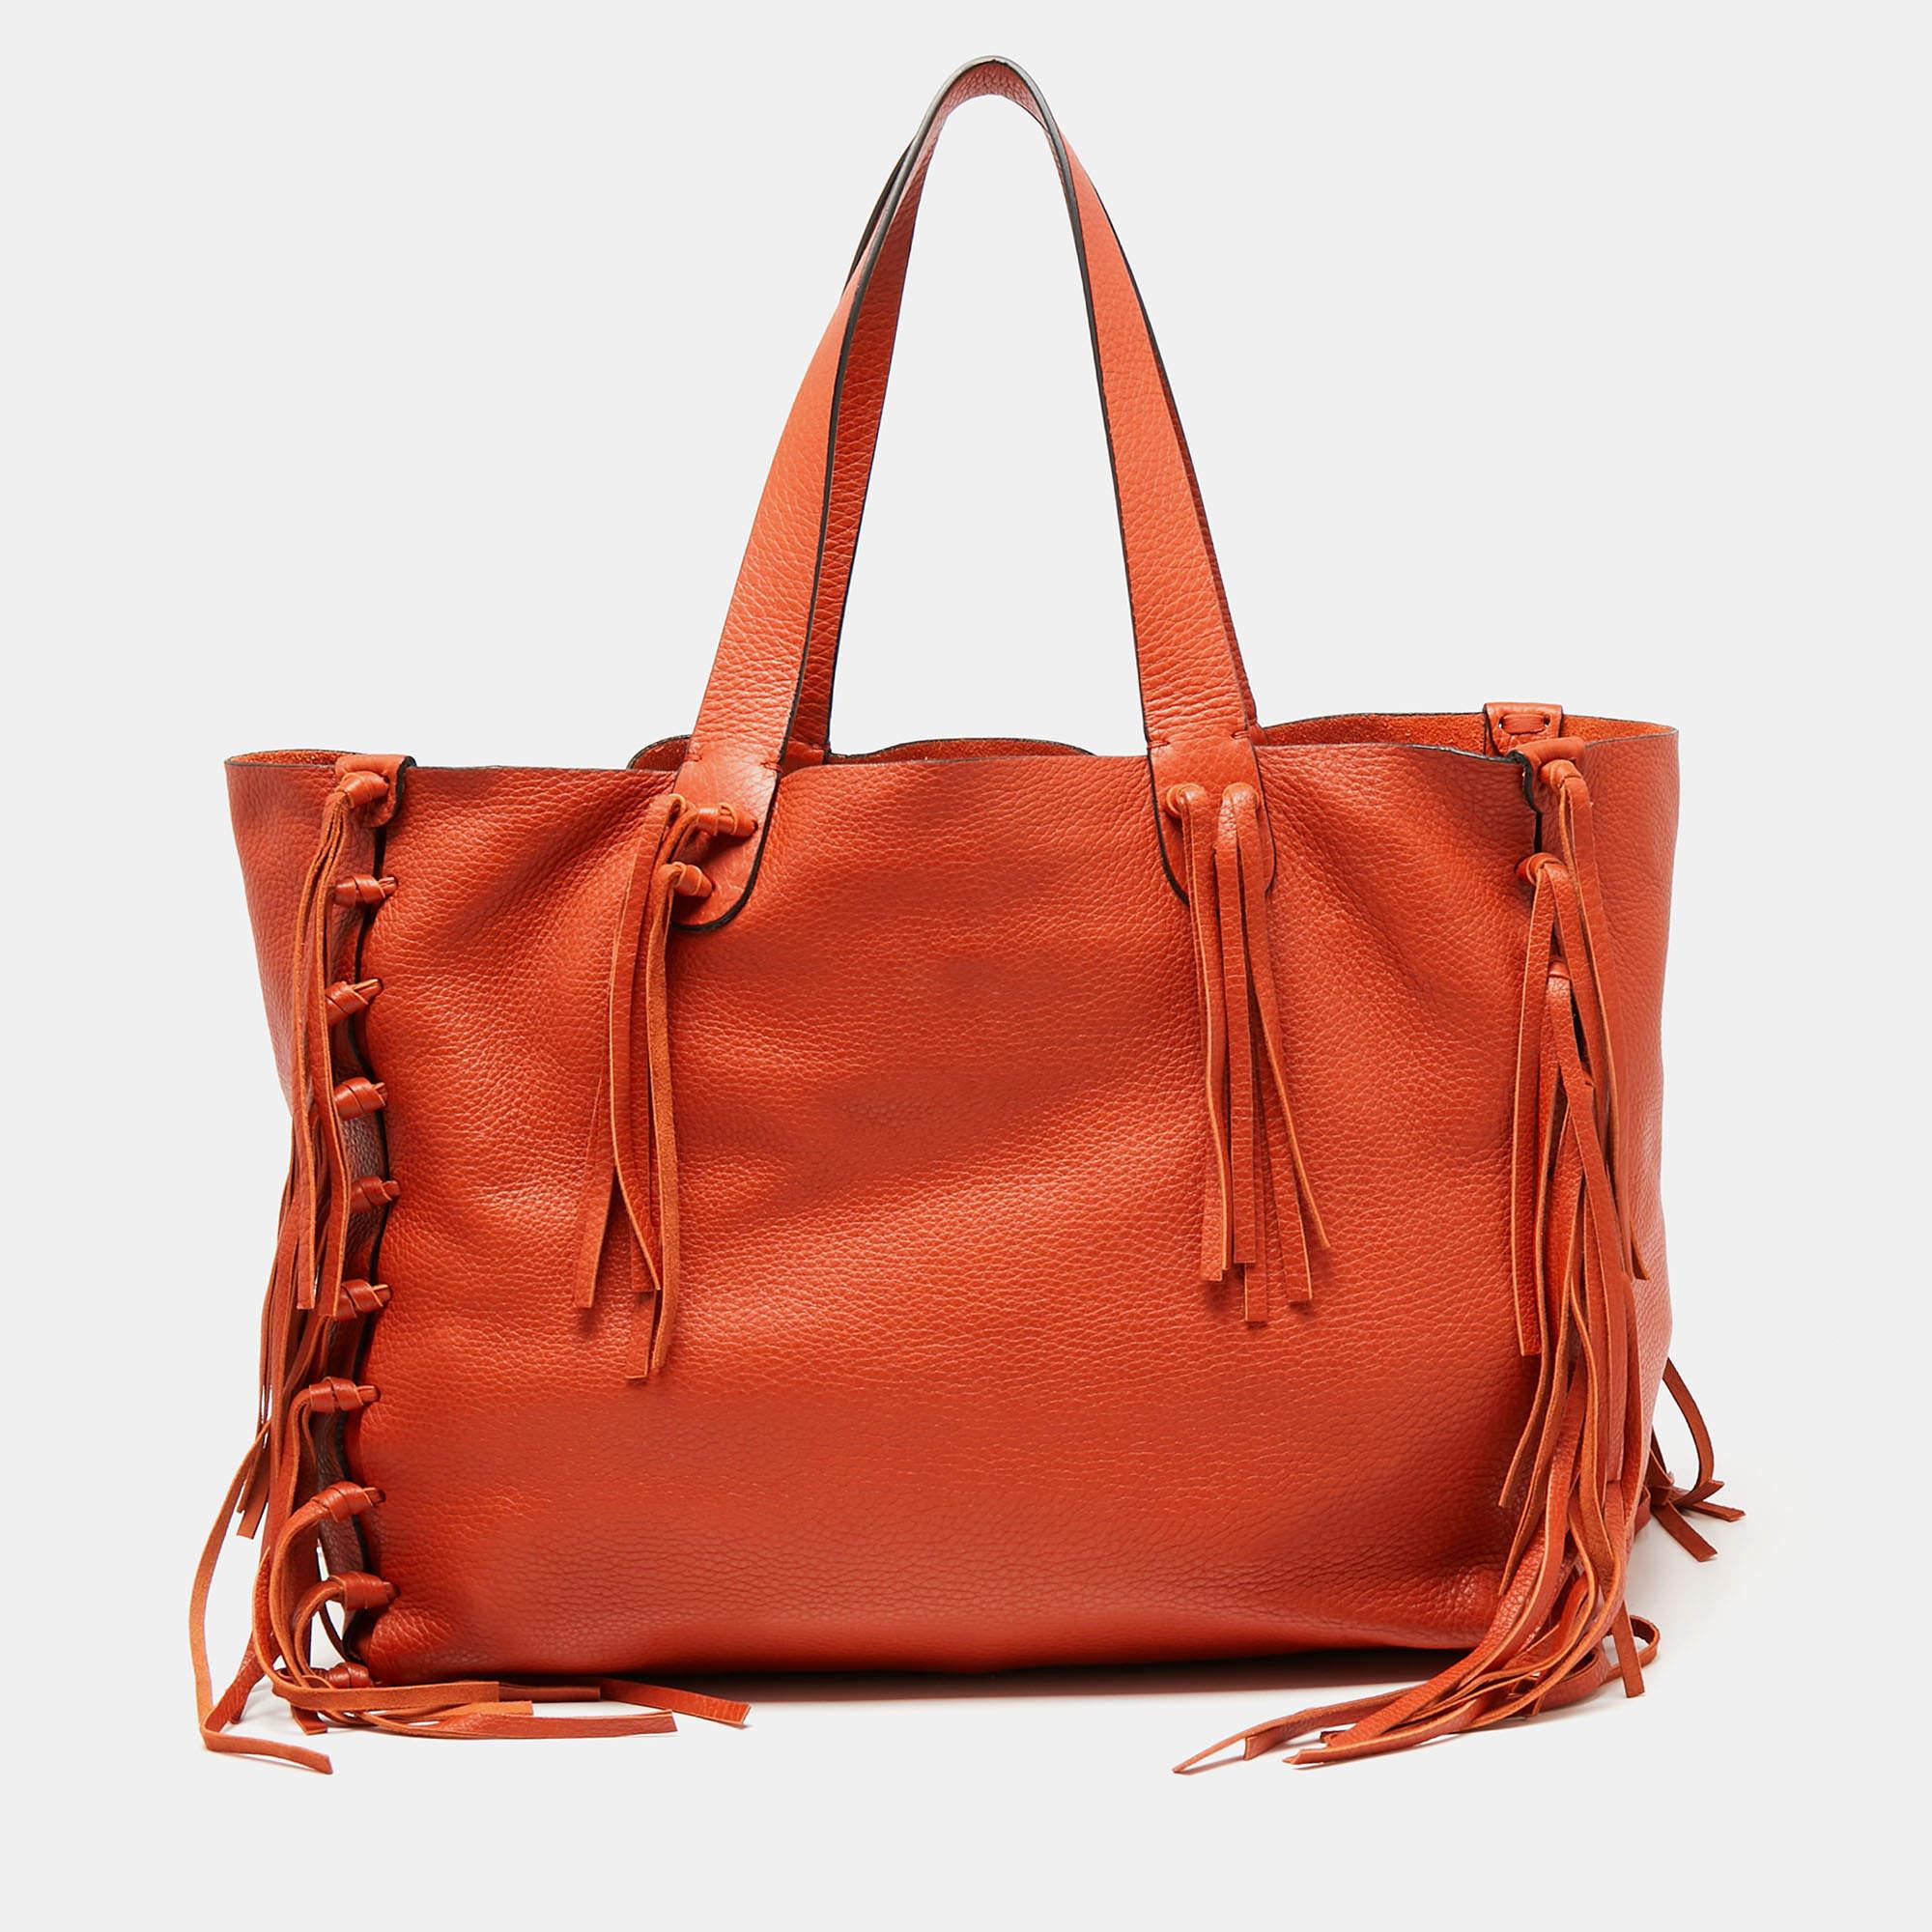 This Valentino C-Rockee tote embodies the perfect balance between art and utility. An ideal everyday accessory, it is elevated with eye-catching features and practical elements. Its construction is highlighted with tied fringed knots on both the